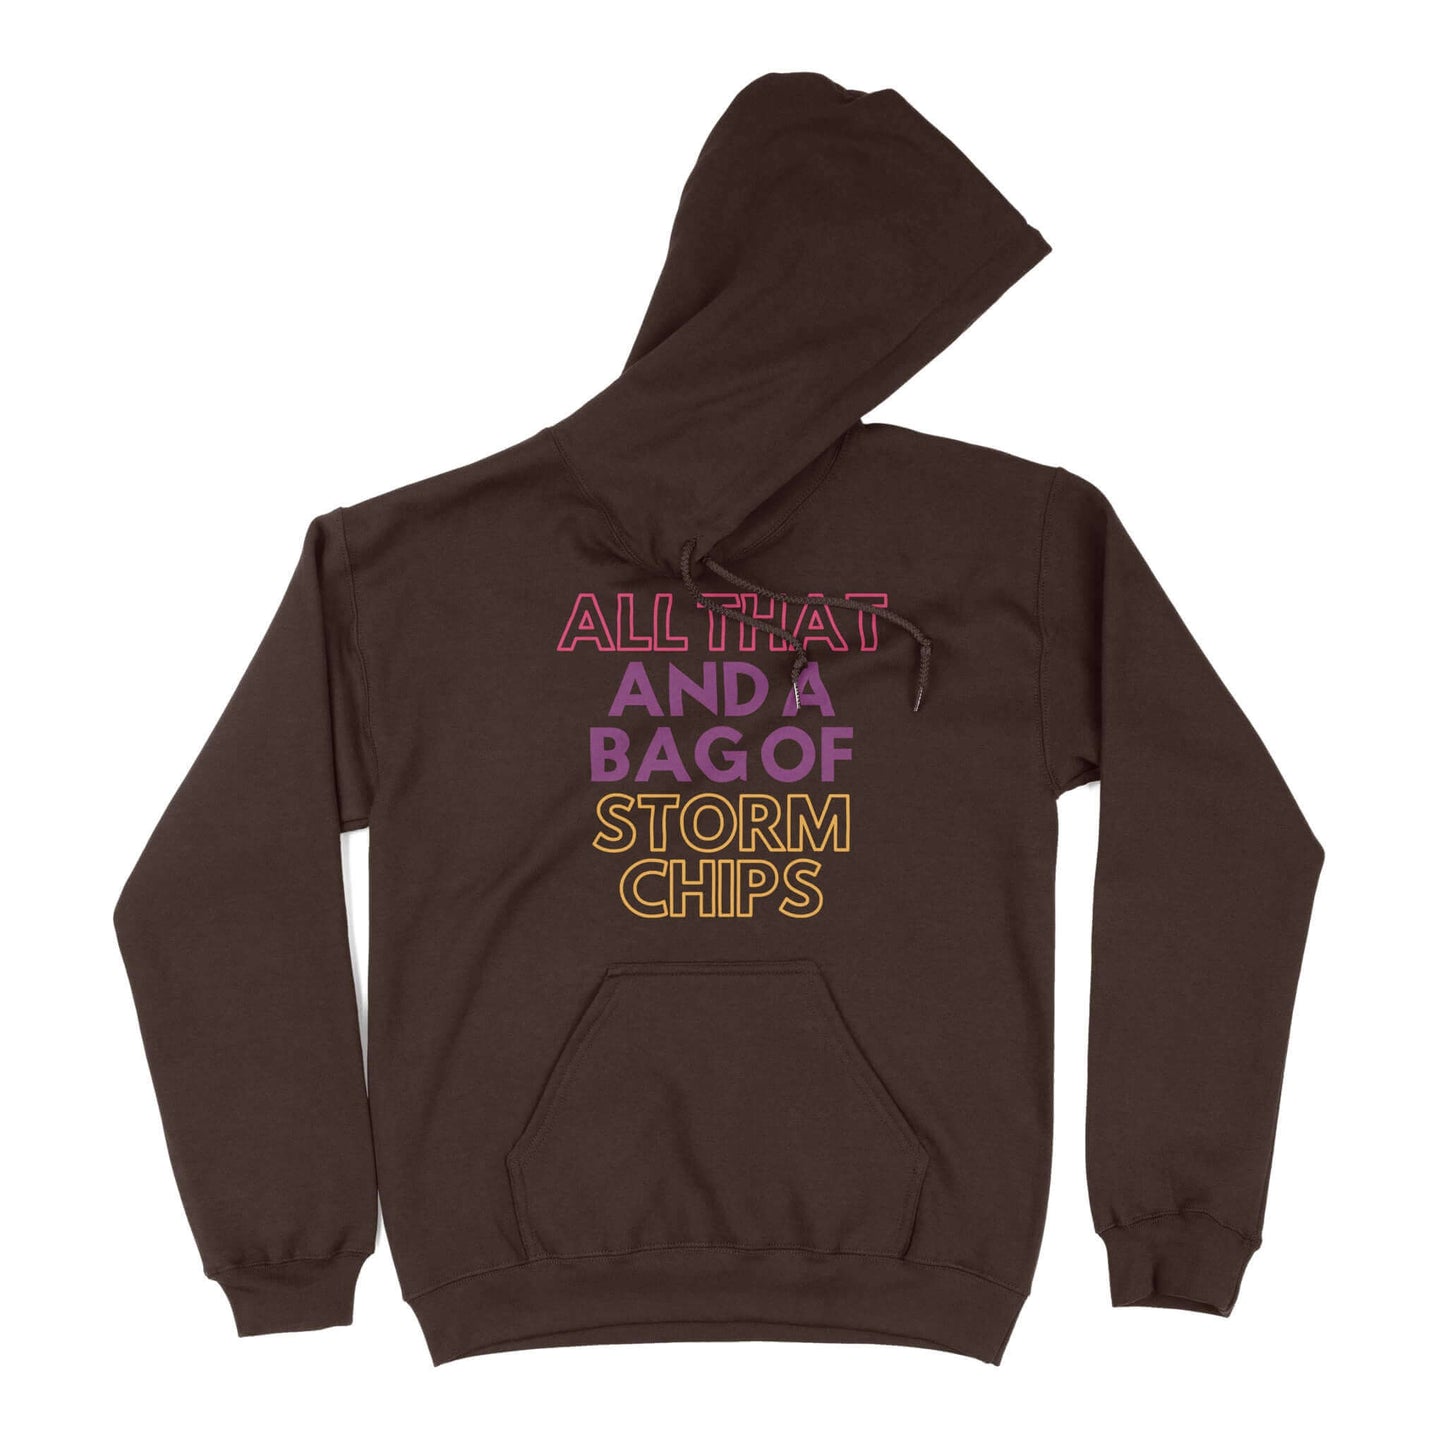 All That and a Bag of Storm Chips Unisex Hoodie in Color: Dark Chocolate - East Coast AF Apparel